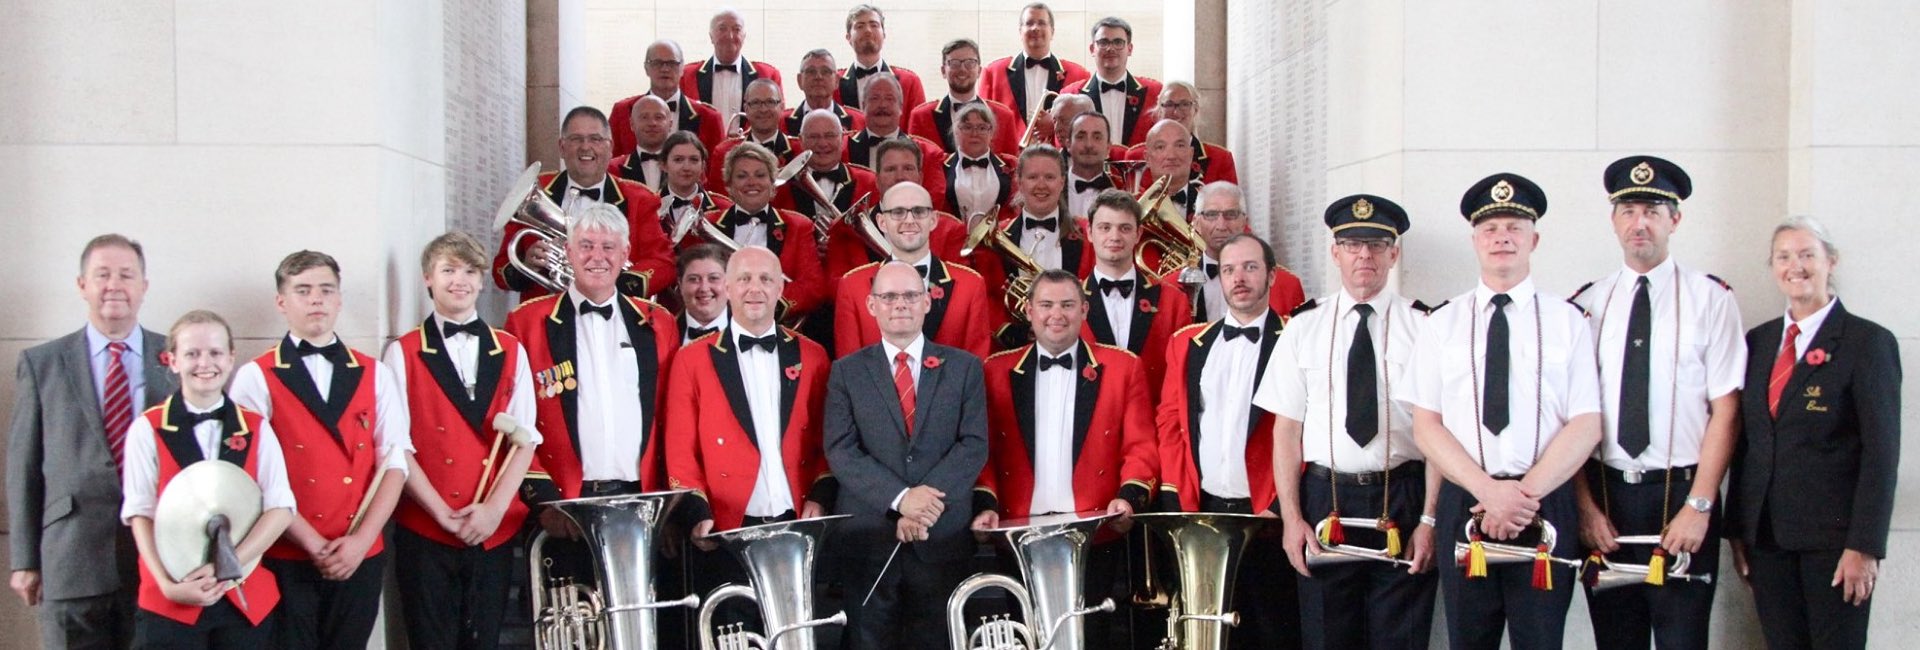 Silk Brass Band. A top class brass band based in Marton, Cheshire